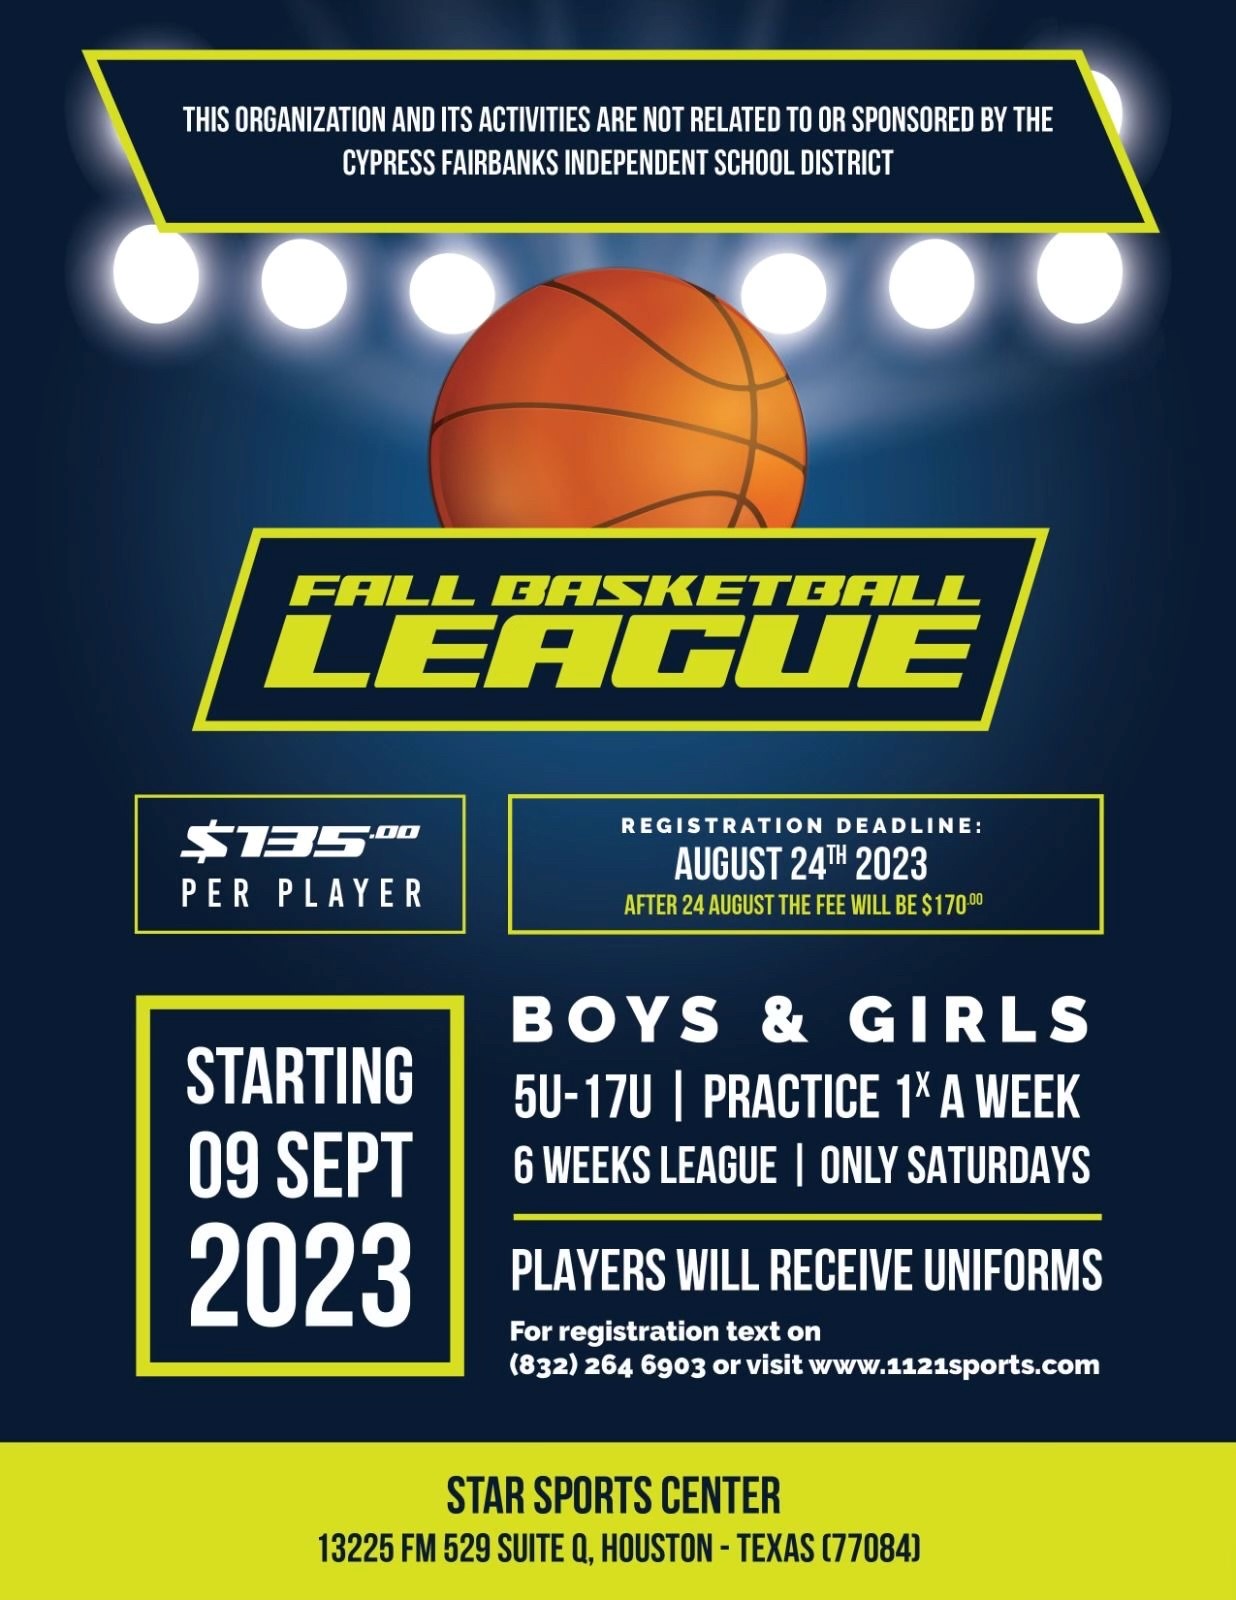 Star Sports Center  Serviing mental health special needs and foster kids  Boys & girls  Practice once on Fridays a week for 6 weeks Players will receive uniforms Starting September 9, 2023  For registration text 832-264-6903 or visit www.sports1121.com  This activity is not related to or sponsored by the Cypress-Fairbanks Independent School District.